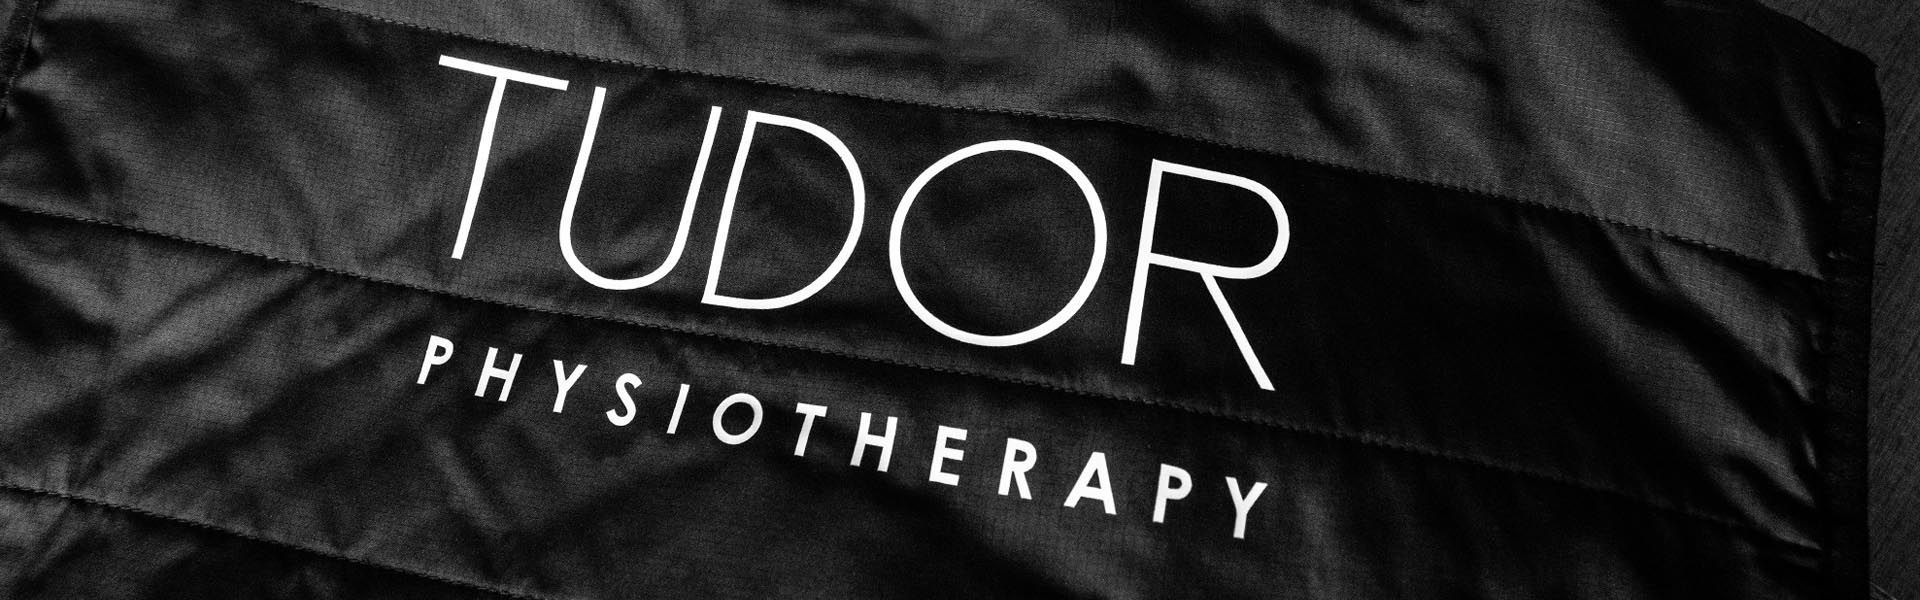 a black jacket with tudor physiotherapy printed on it